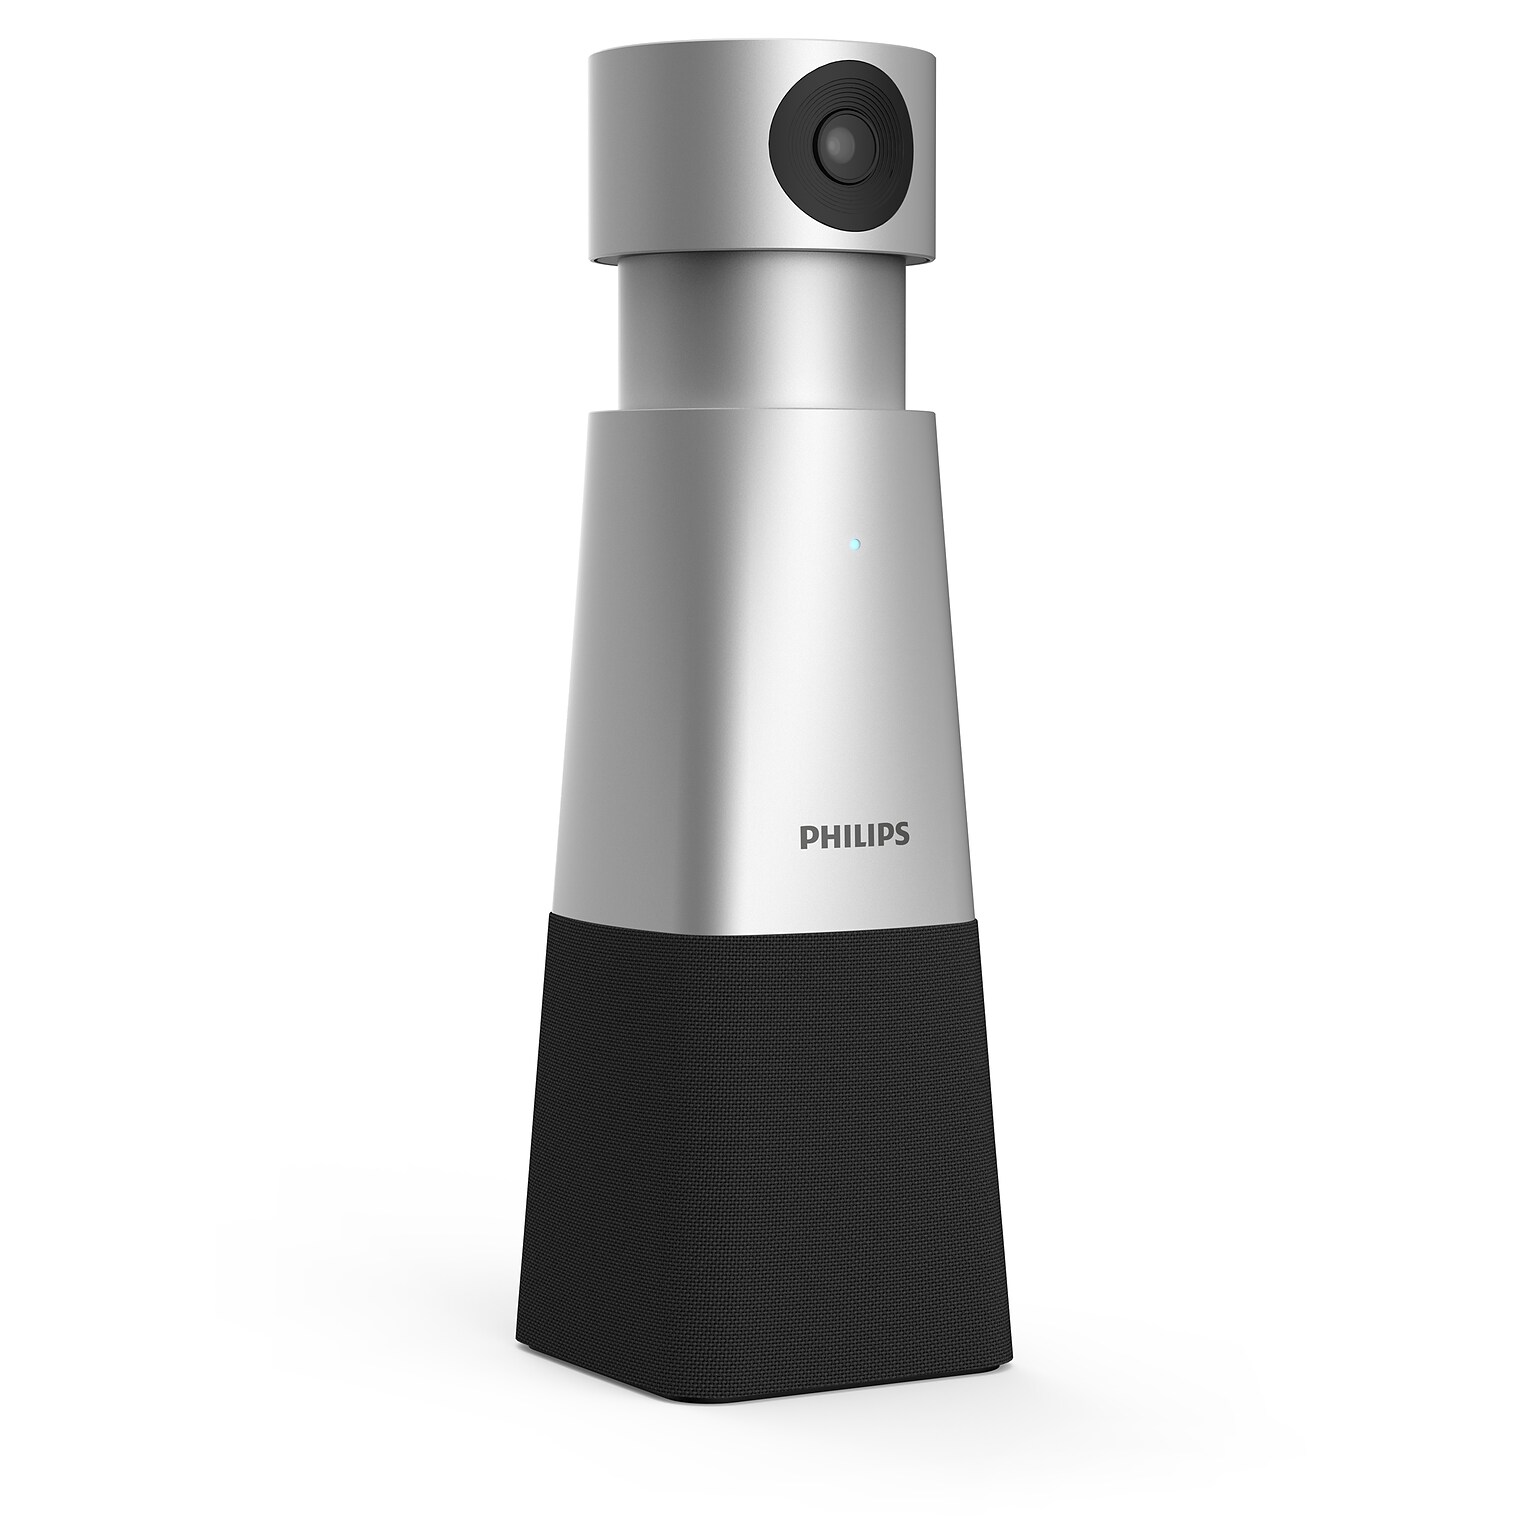 SmartMeeting HD Audio and Video Conferencing Solution (PSE0550)